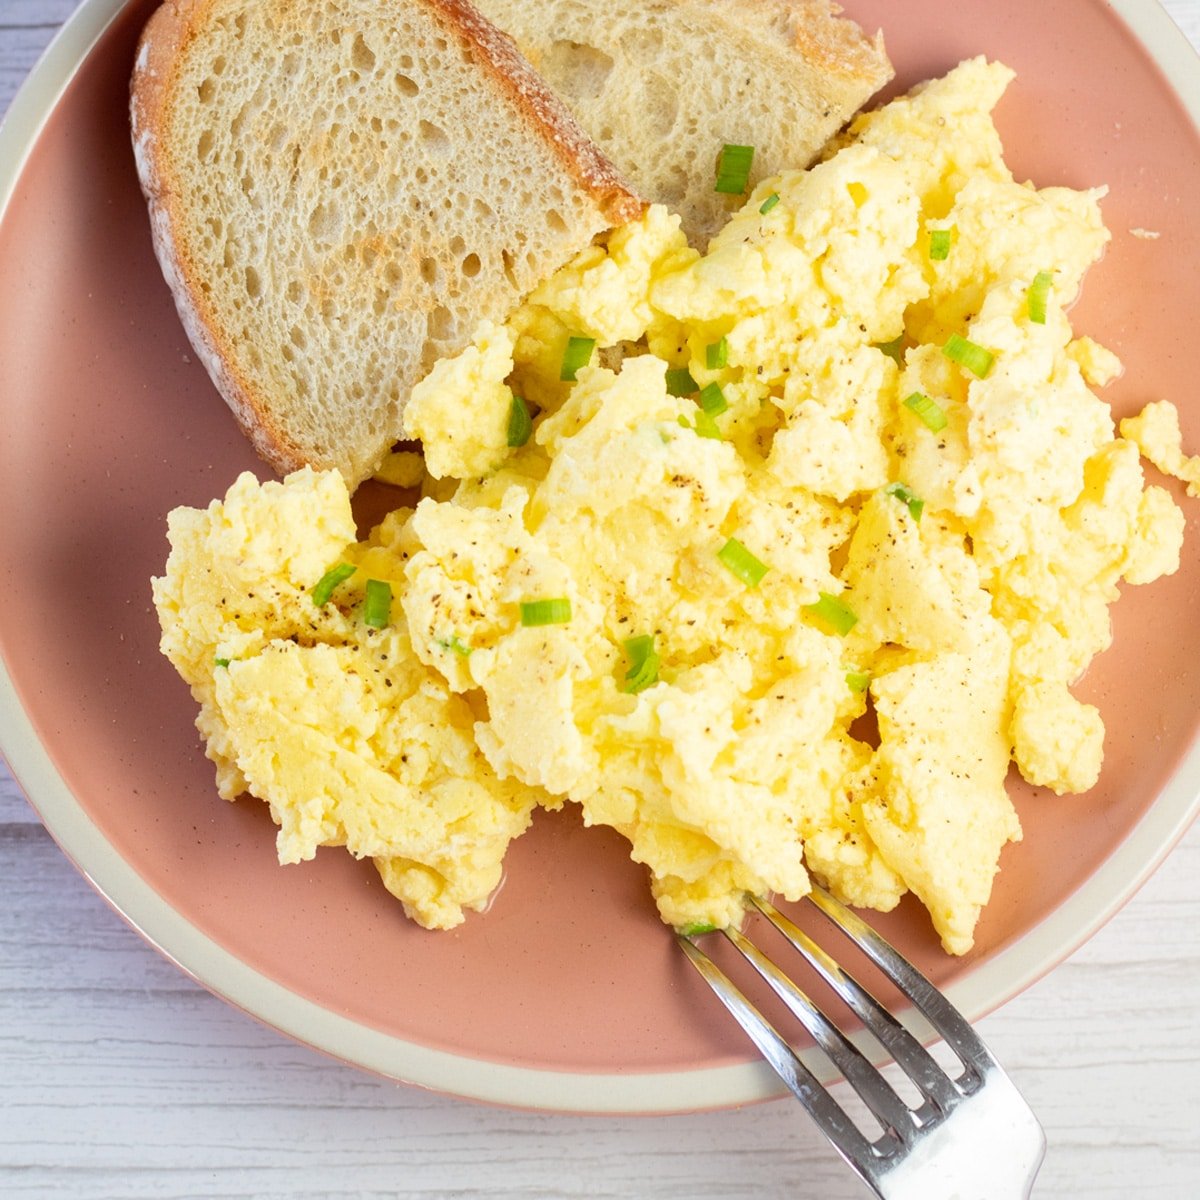 Square image of scrambled eggs on rose colored plate with toast on the side.